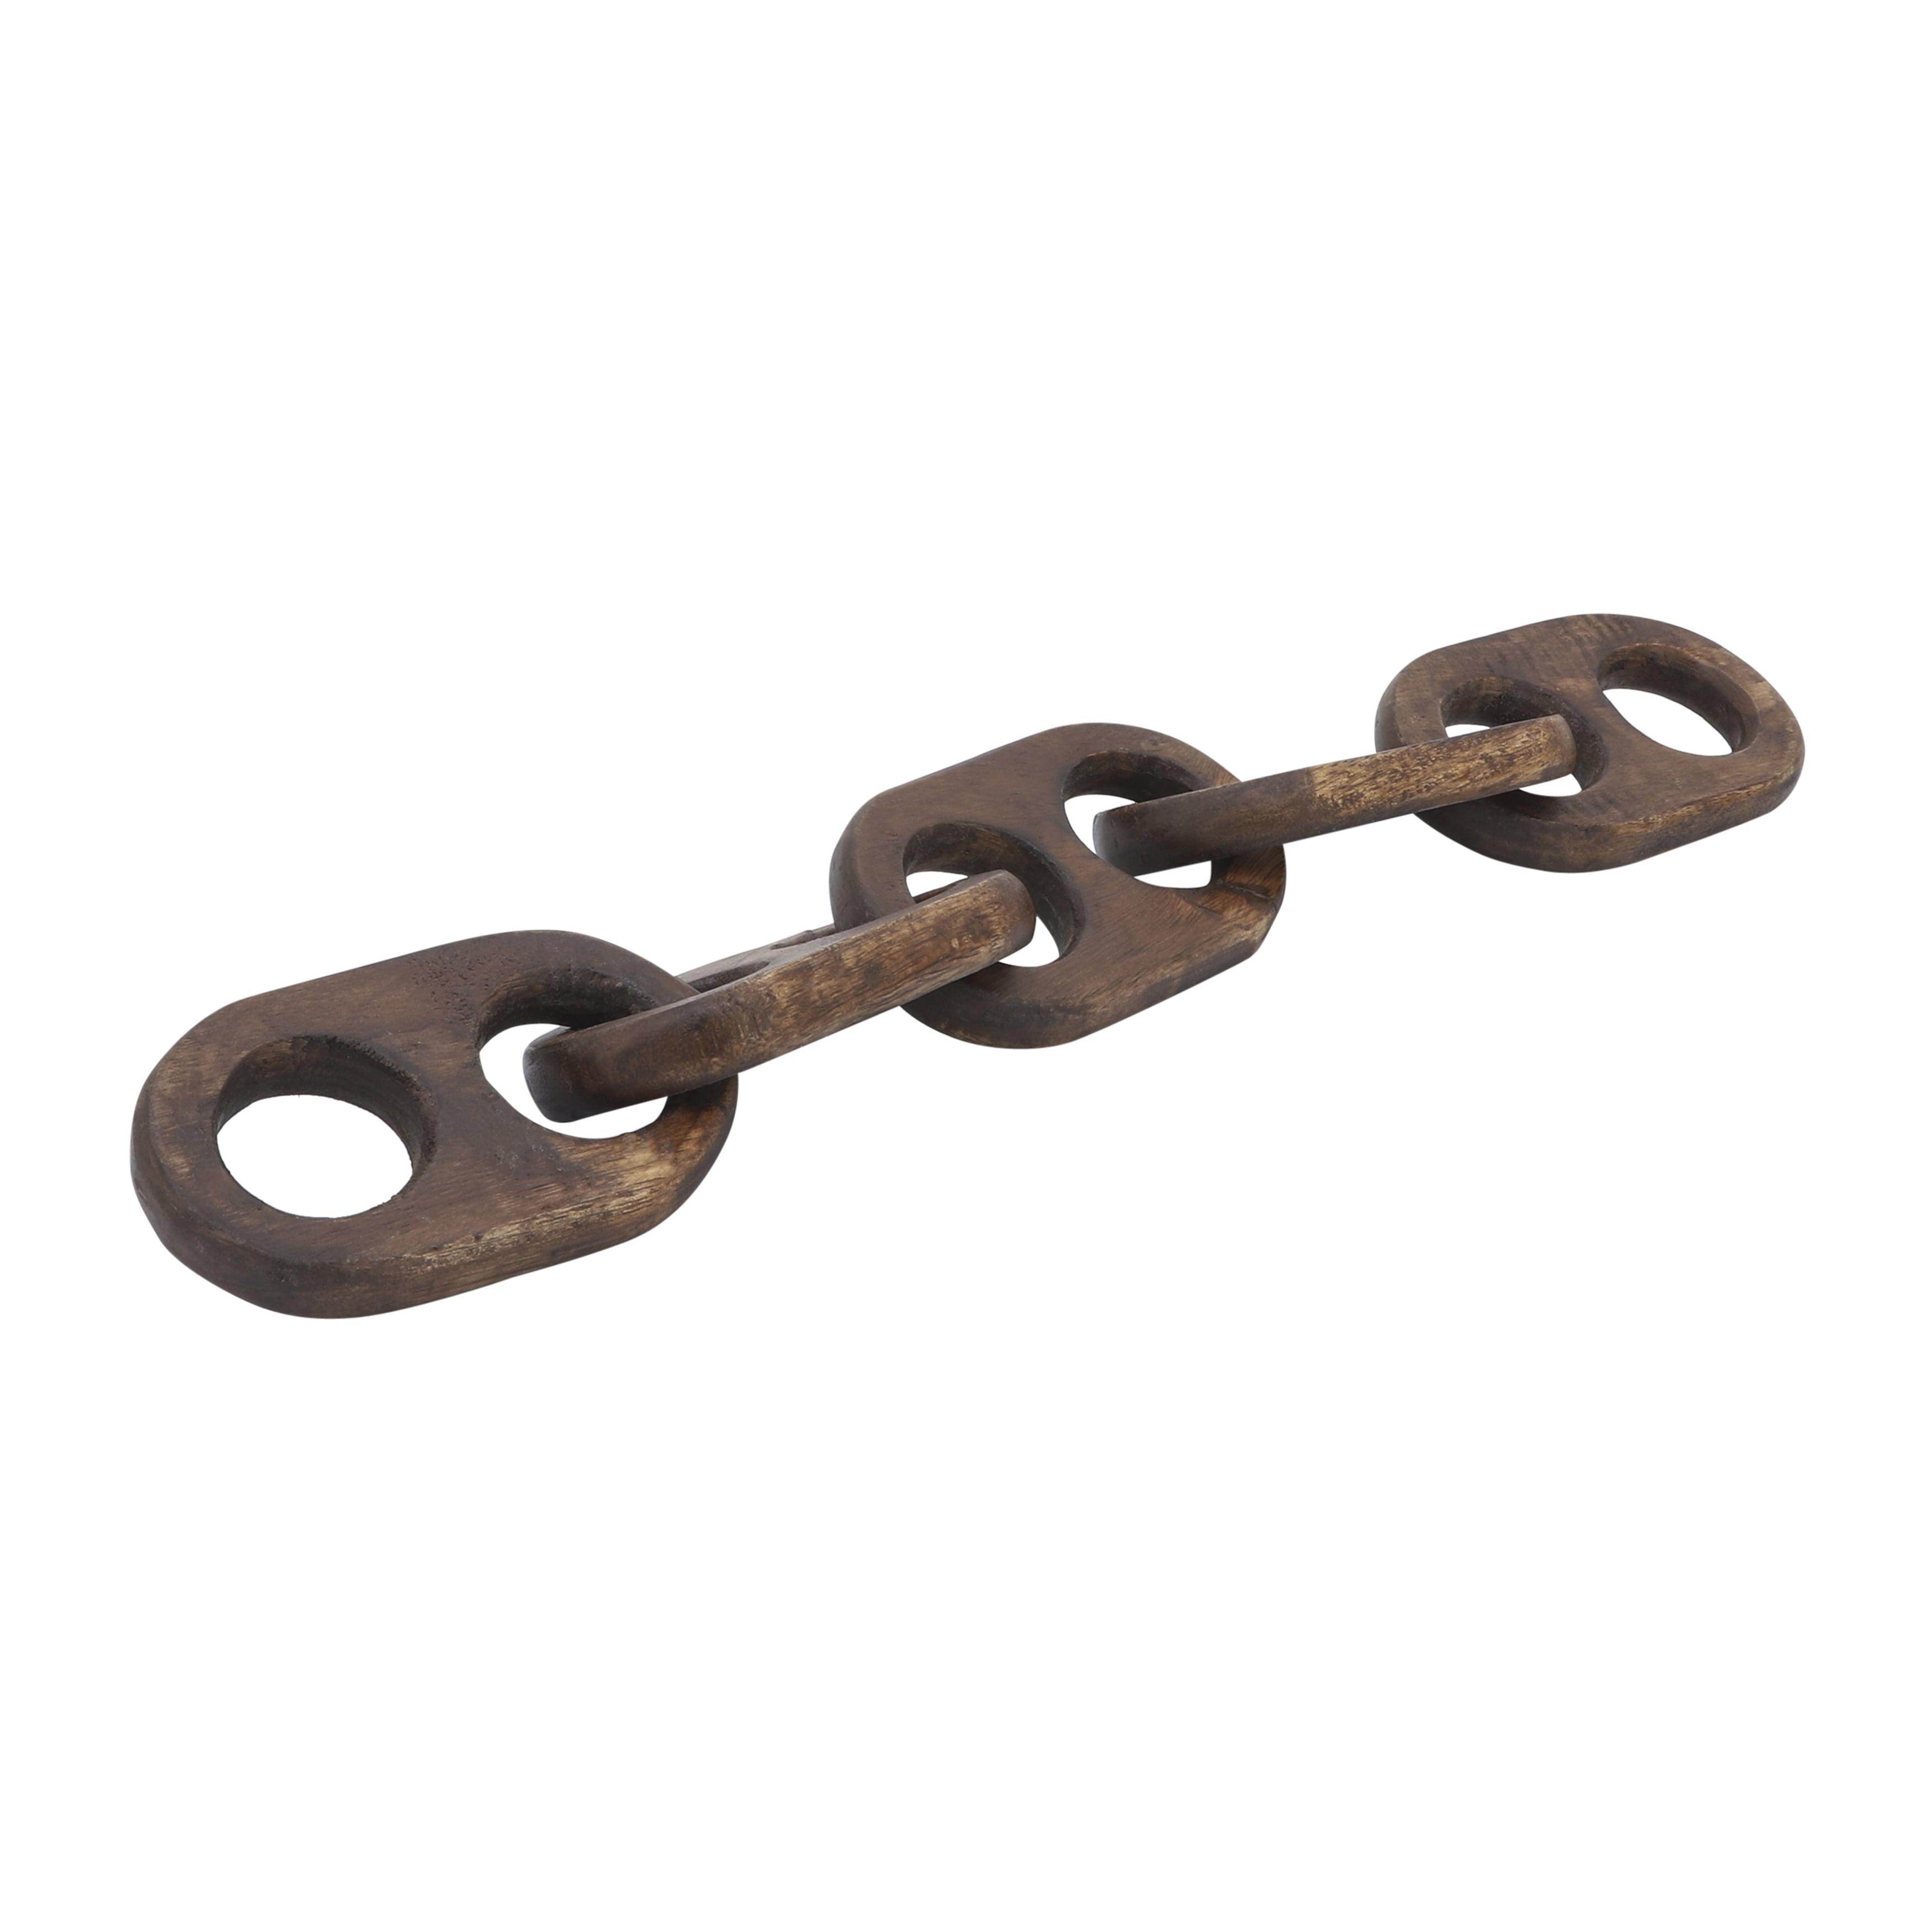 Rustic Brown Wooden Chain Link Wall Sculpture - 18"